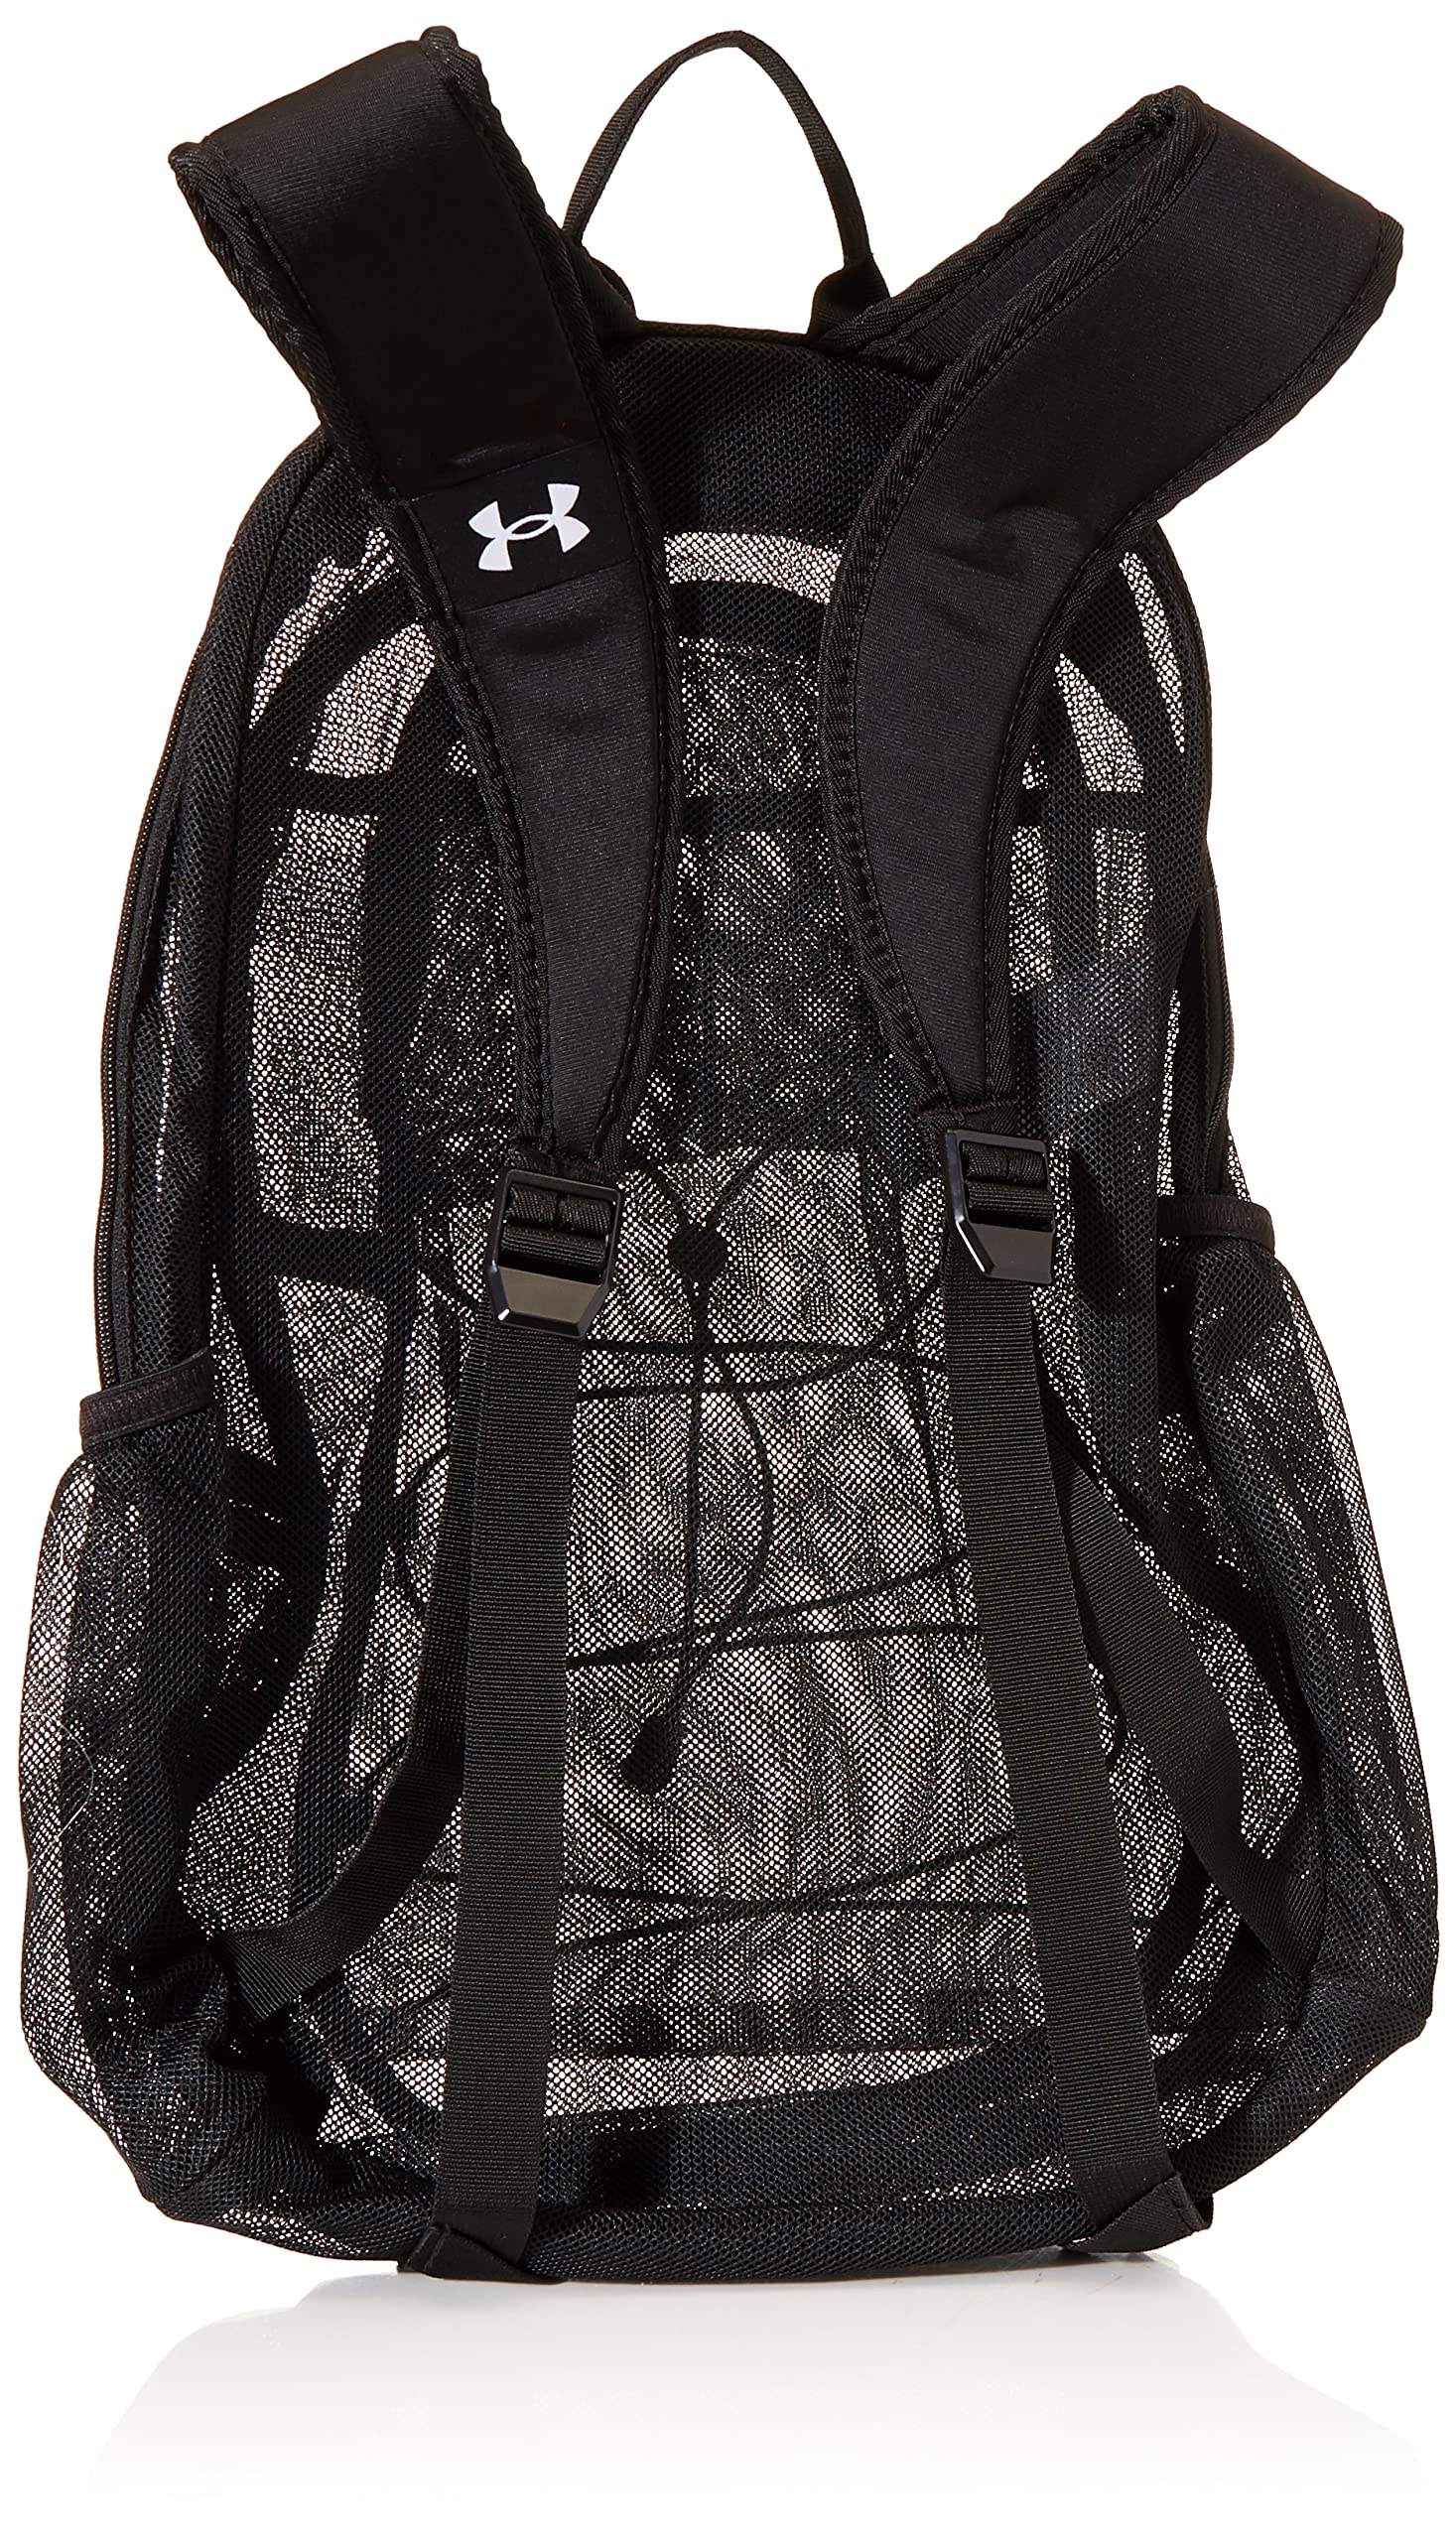 Under Armour Hustle Mesh Backpack, (001) Black / / White, One Size Fits Most